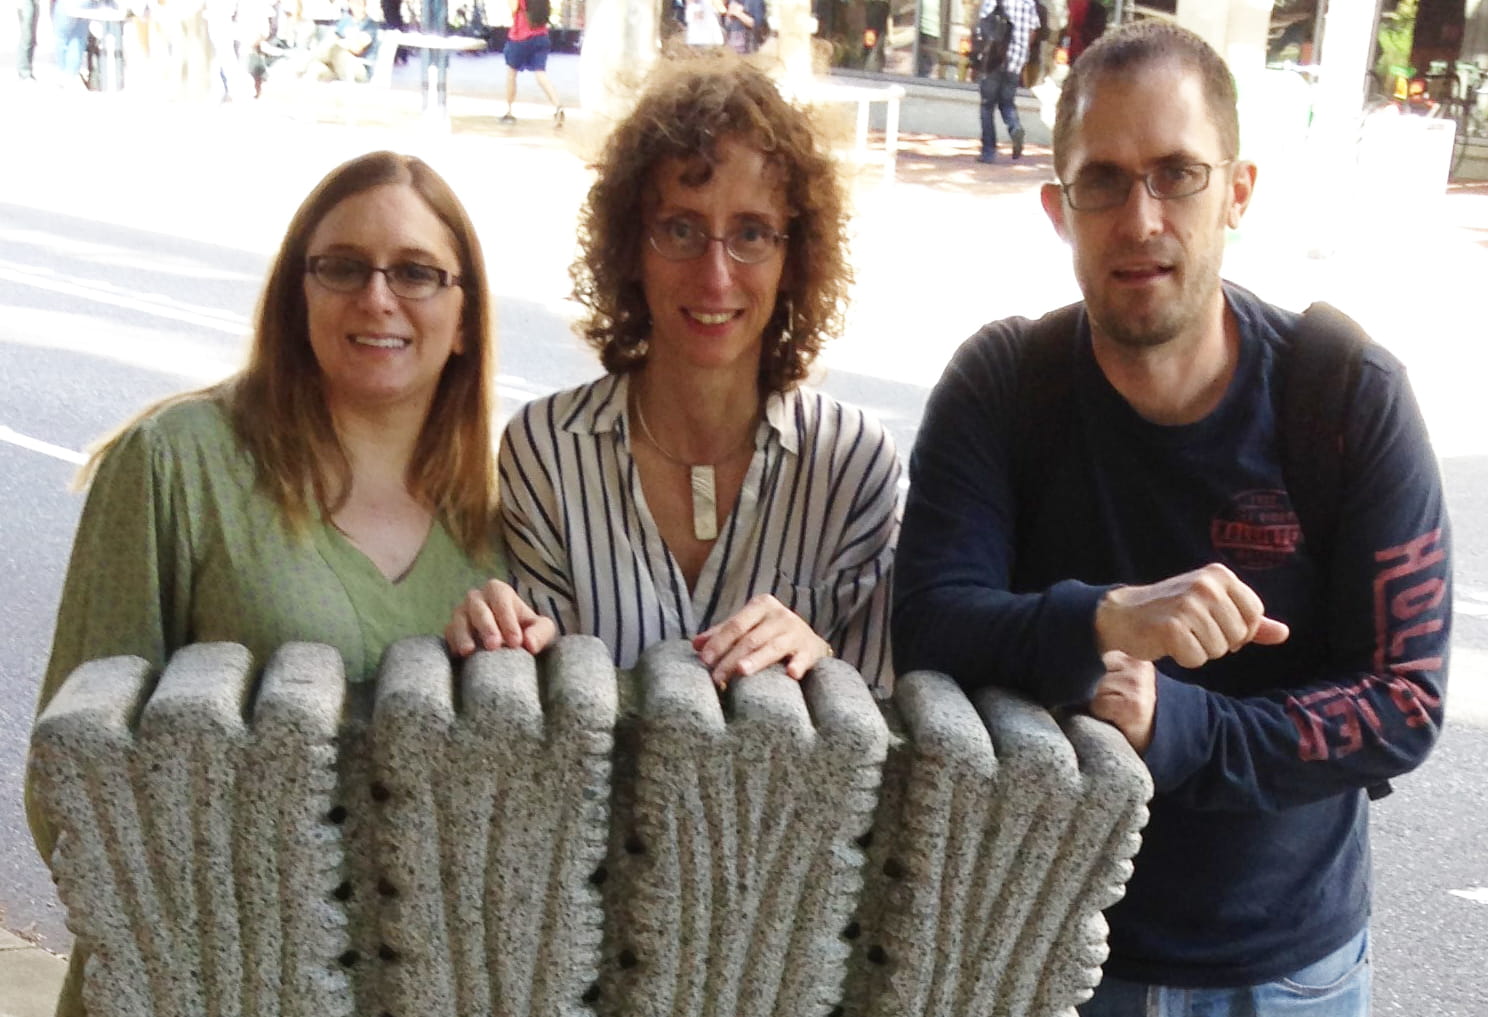 Photo showing Katrina Pound, Sophia Passy, and Chad Larson, from left, with a diatom statue in Portland, Oregon. Diatoms are one of the subjects of the trio’s recent publication. 